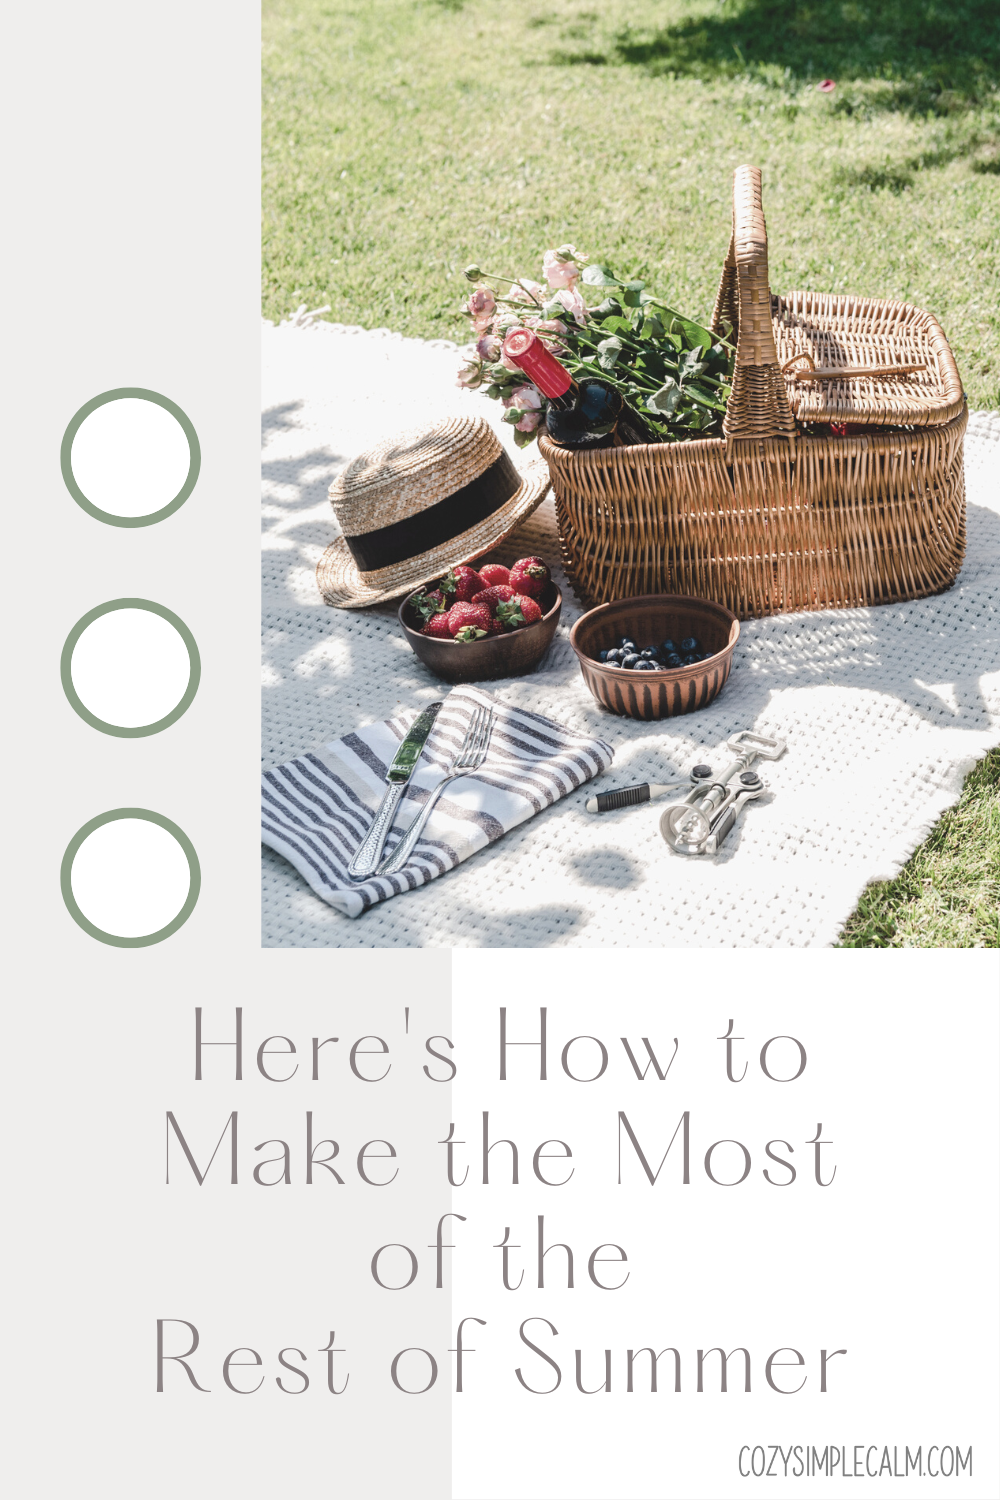 Image of picnic basket and straw hat on blanket - Text overlay: Here's how to make the most of the rest of summer - cozysimplecalm.com